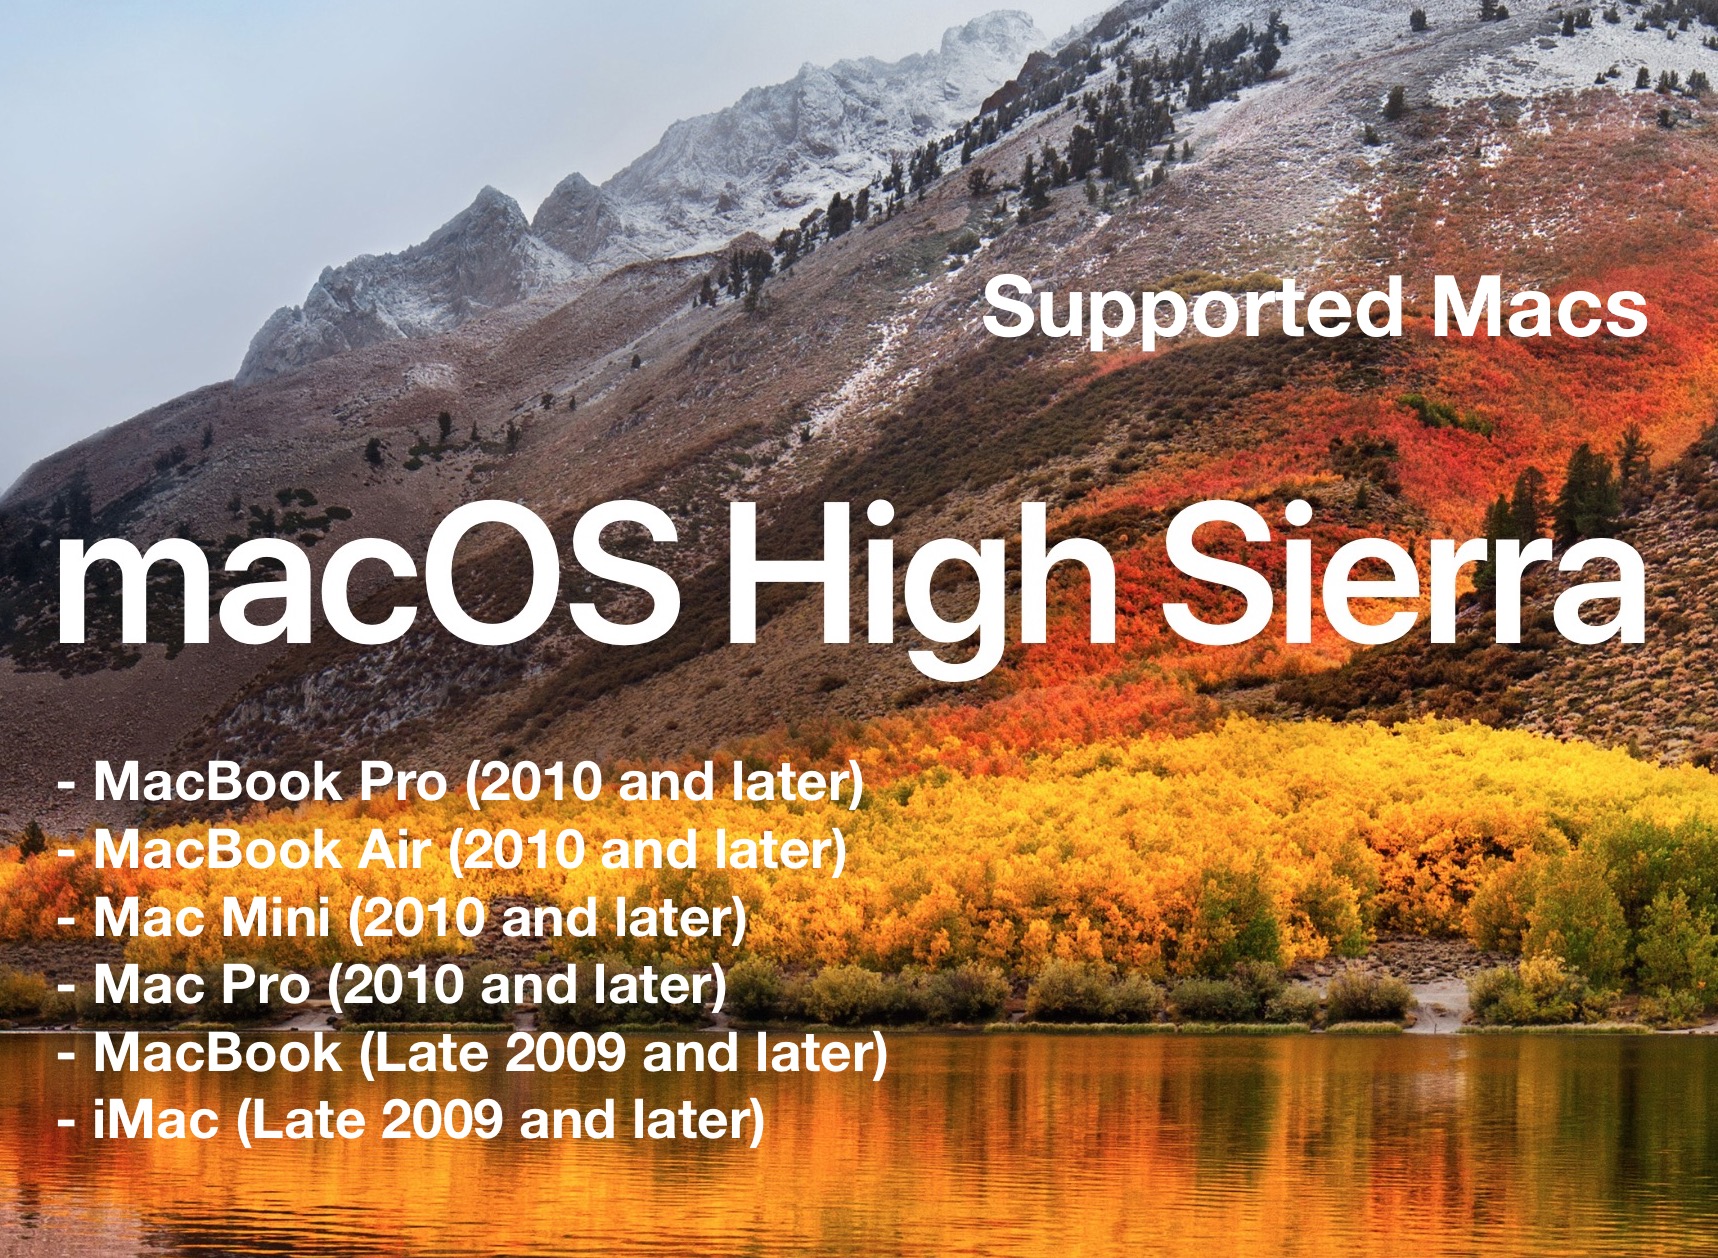 mac os high sierra requirements for photoshop